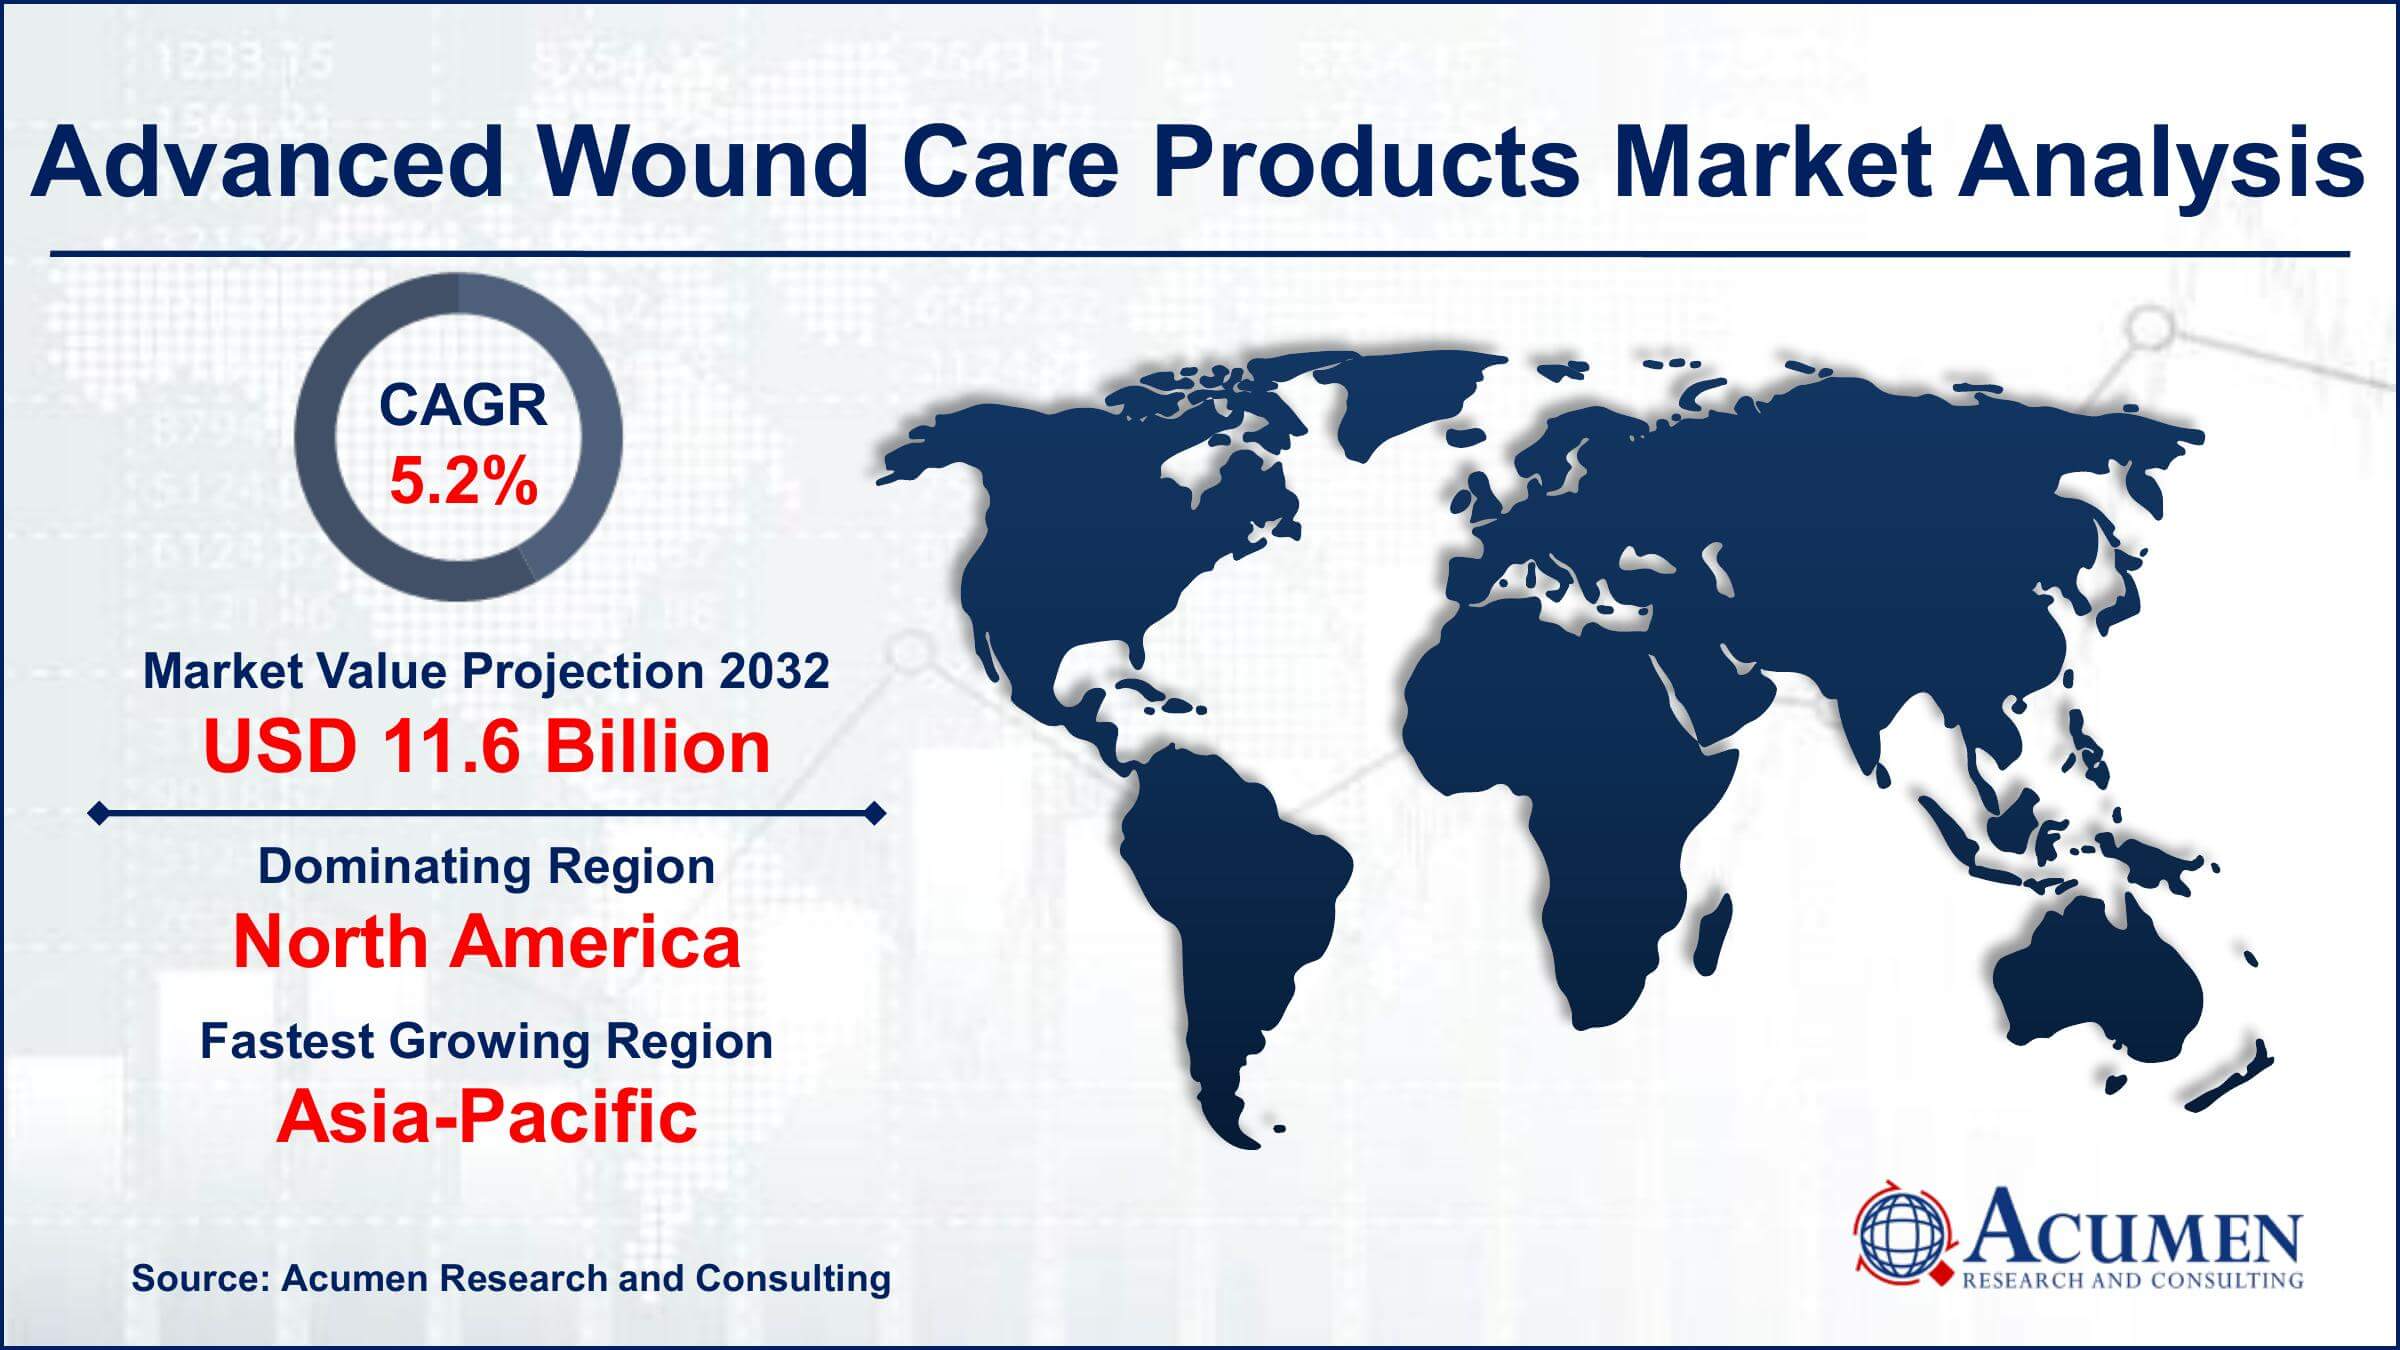 Global Advanced Wound Care Products Market Trends